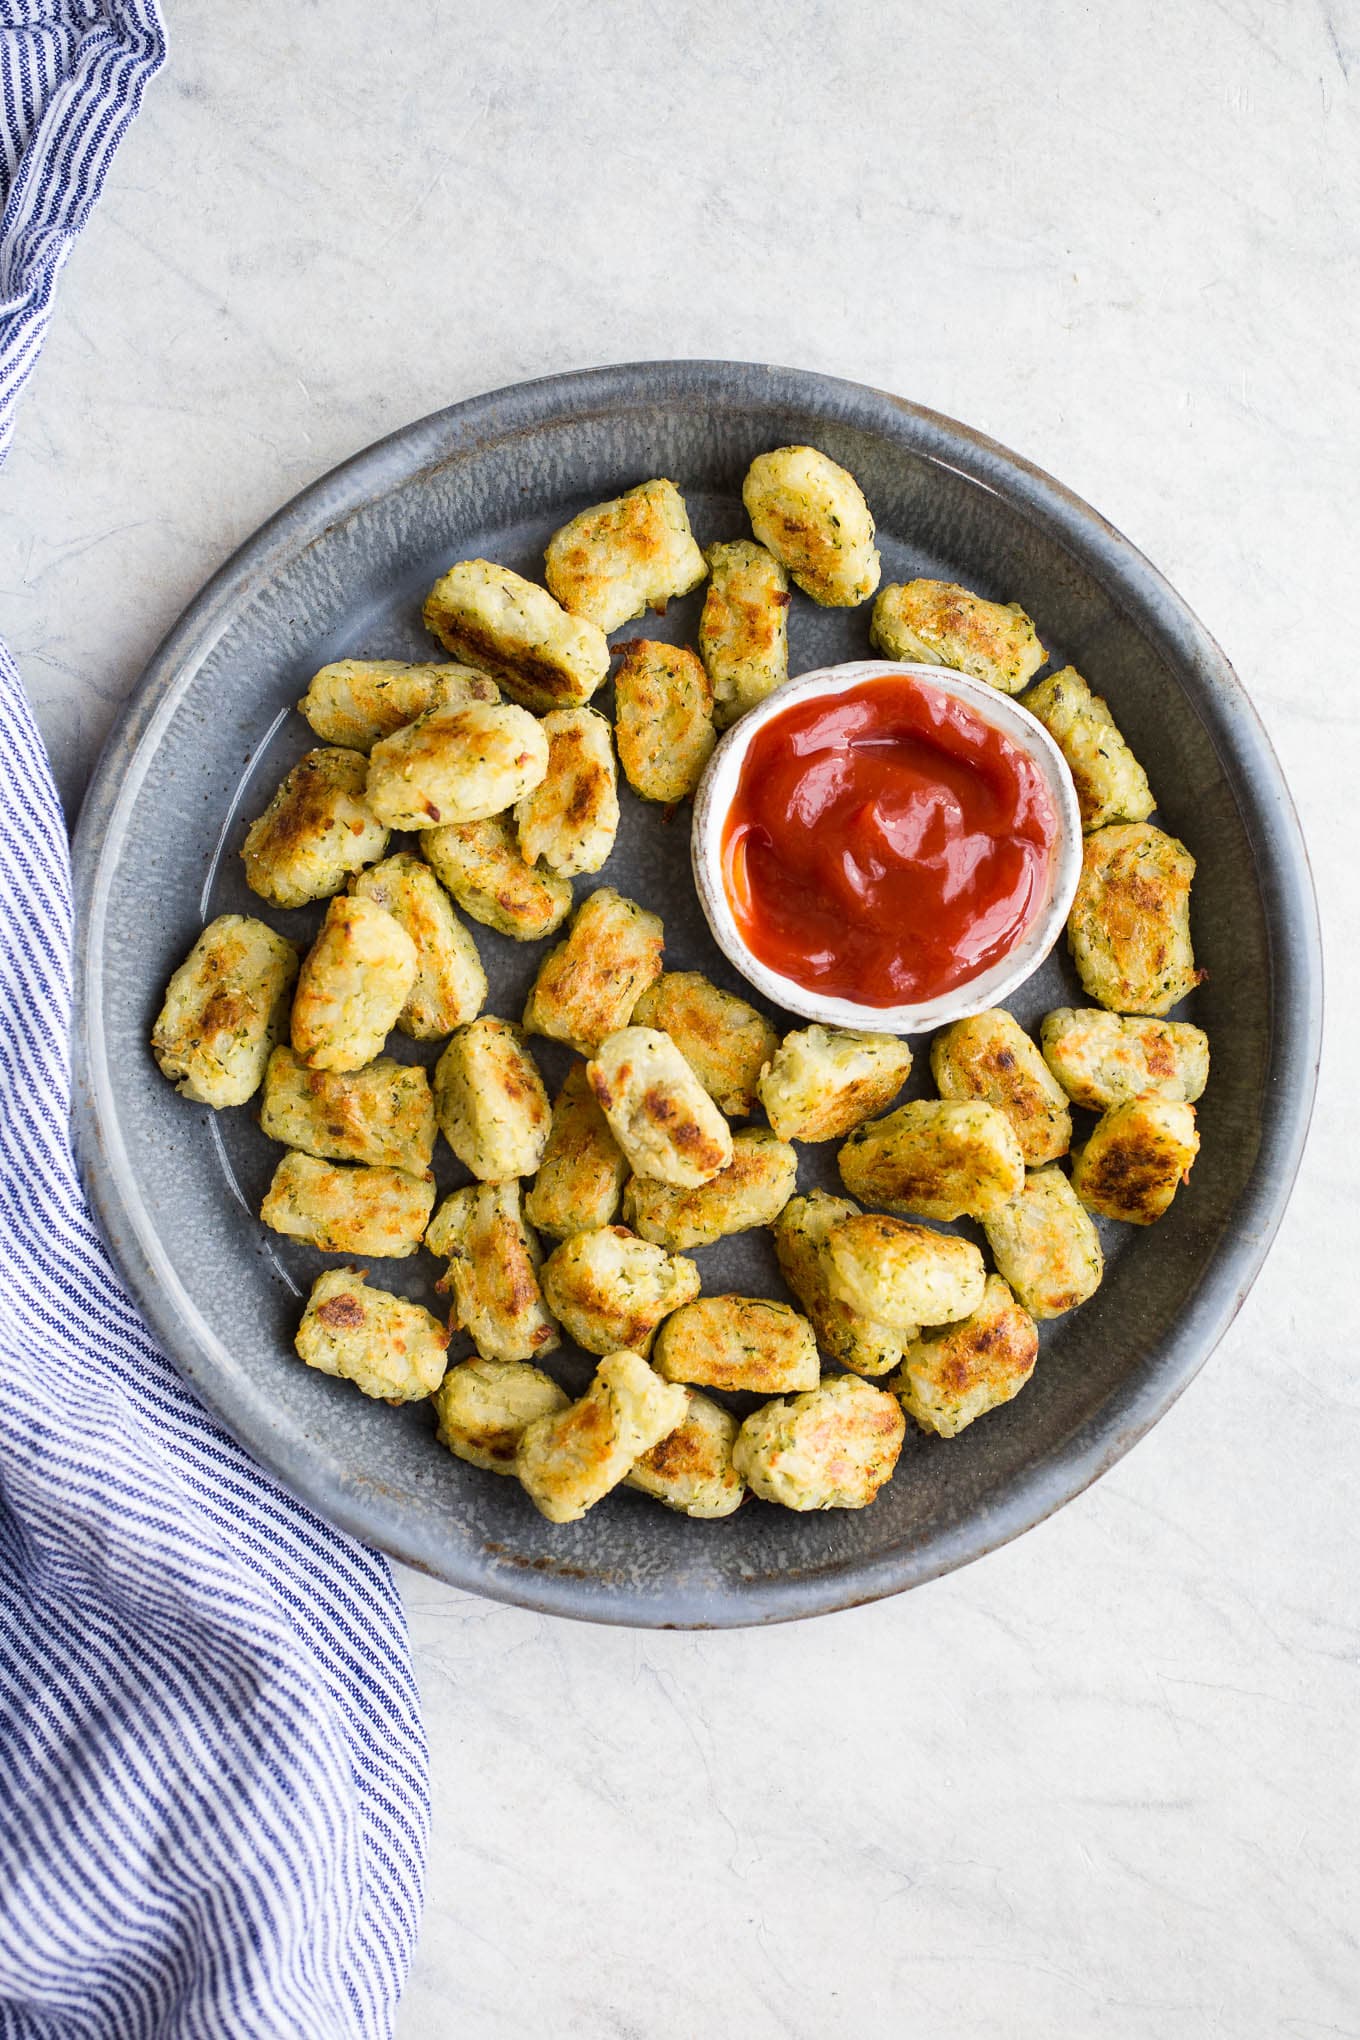 Baked Zucchini Tater Tots make for a veggie-friendly side dish, appetizer, or snack. Made with fresh zucchini and russet potatoes, these 4-ingredient zucchini tots are sure to be a crowd-pleaser. Gluten-free, vegan.